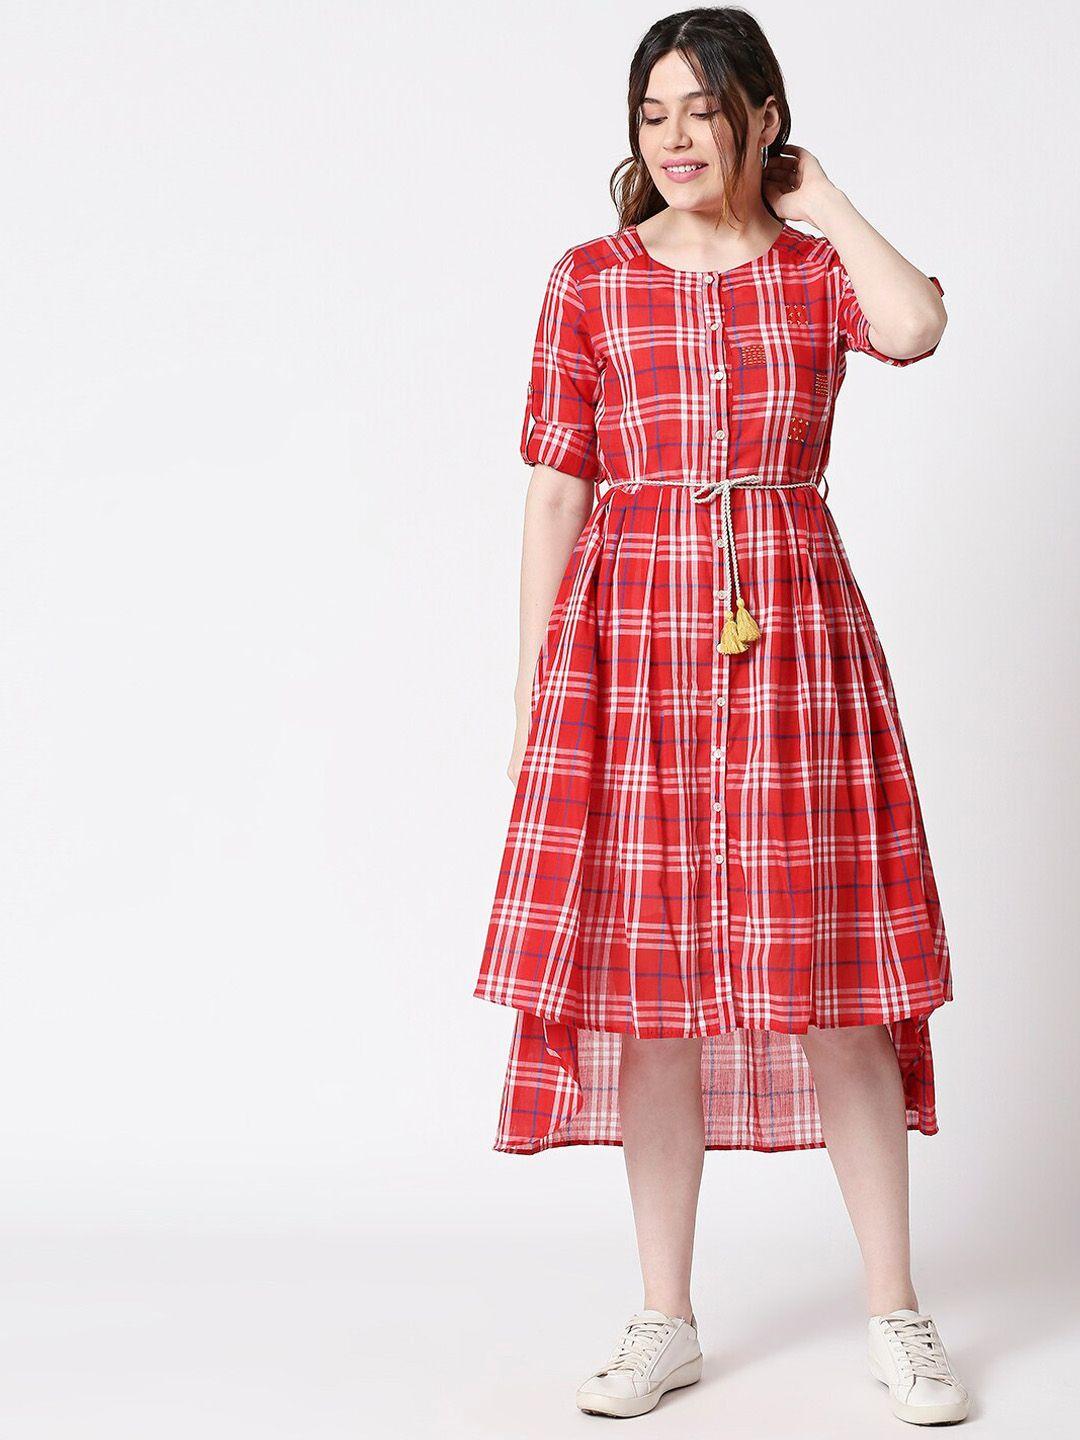 TERQUOIS Women Red Checked A-Line Dress